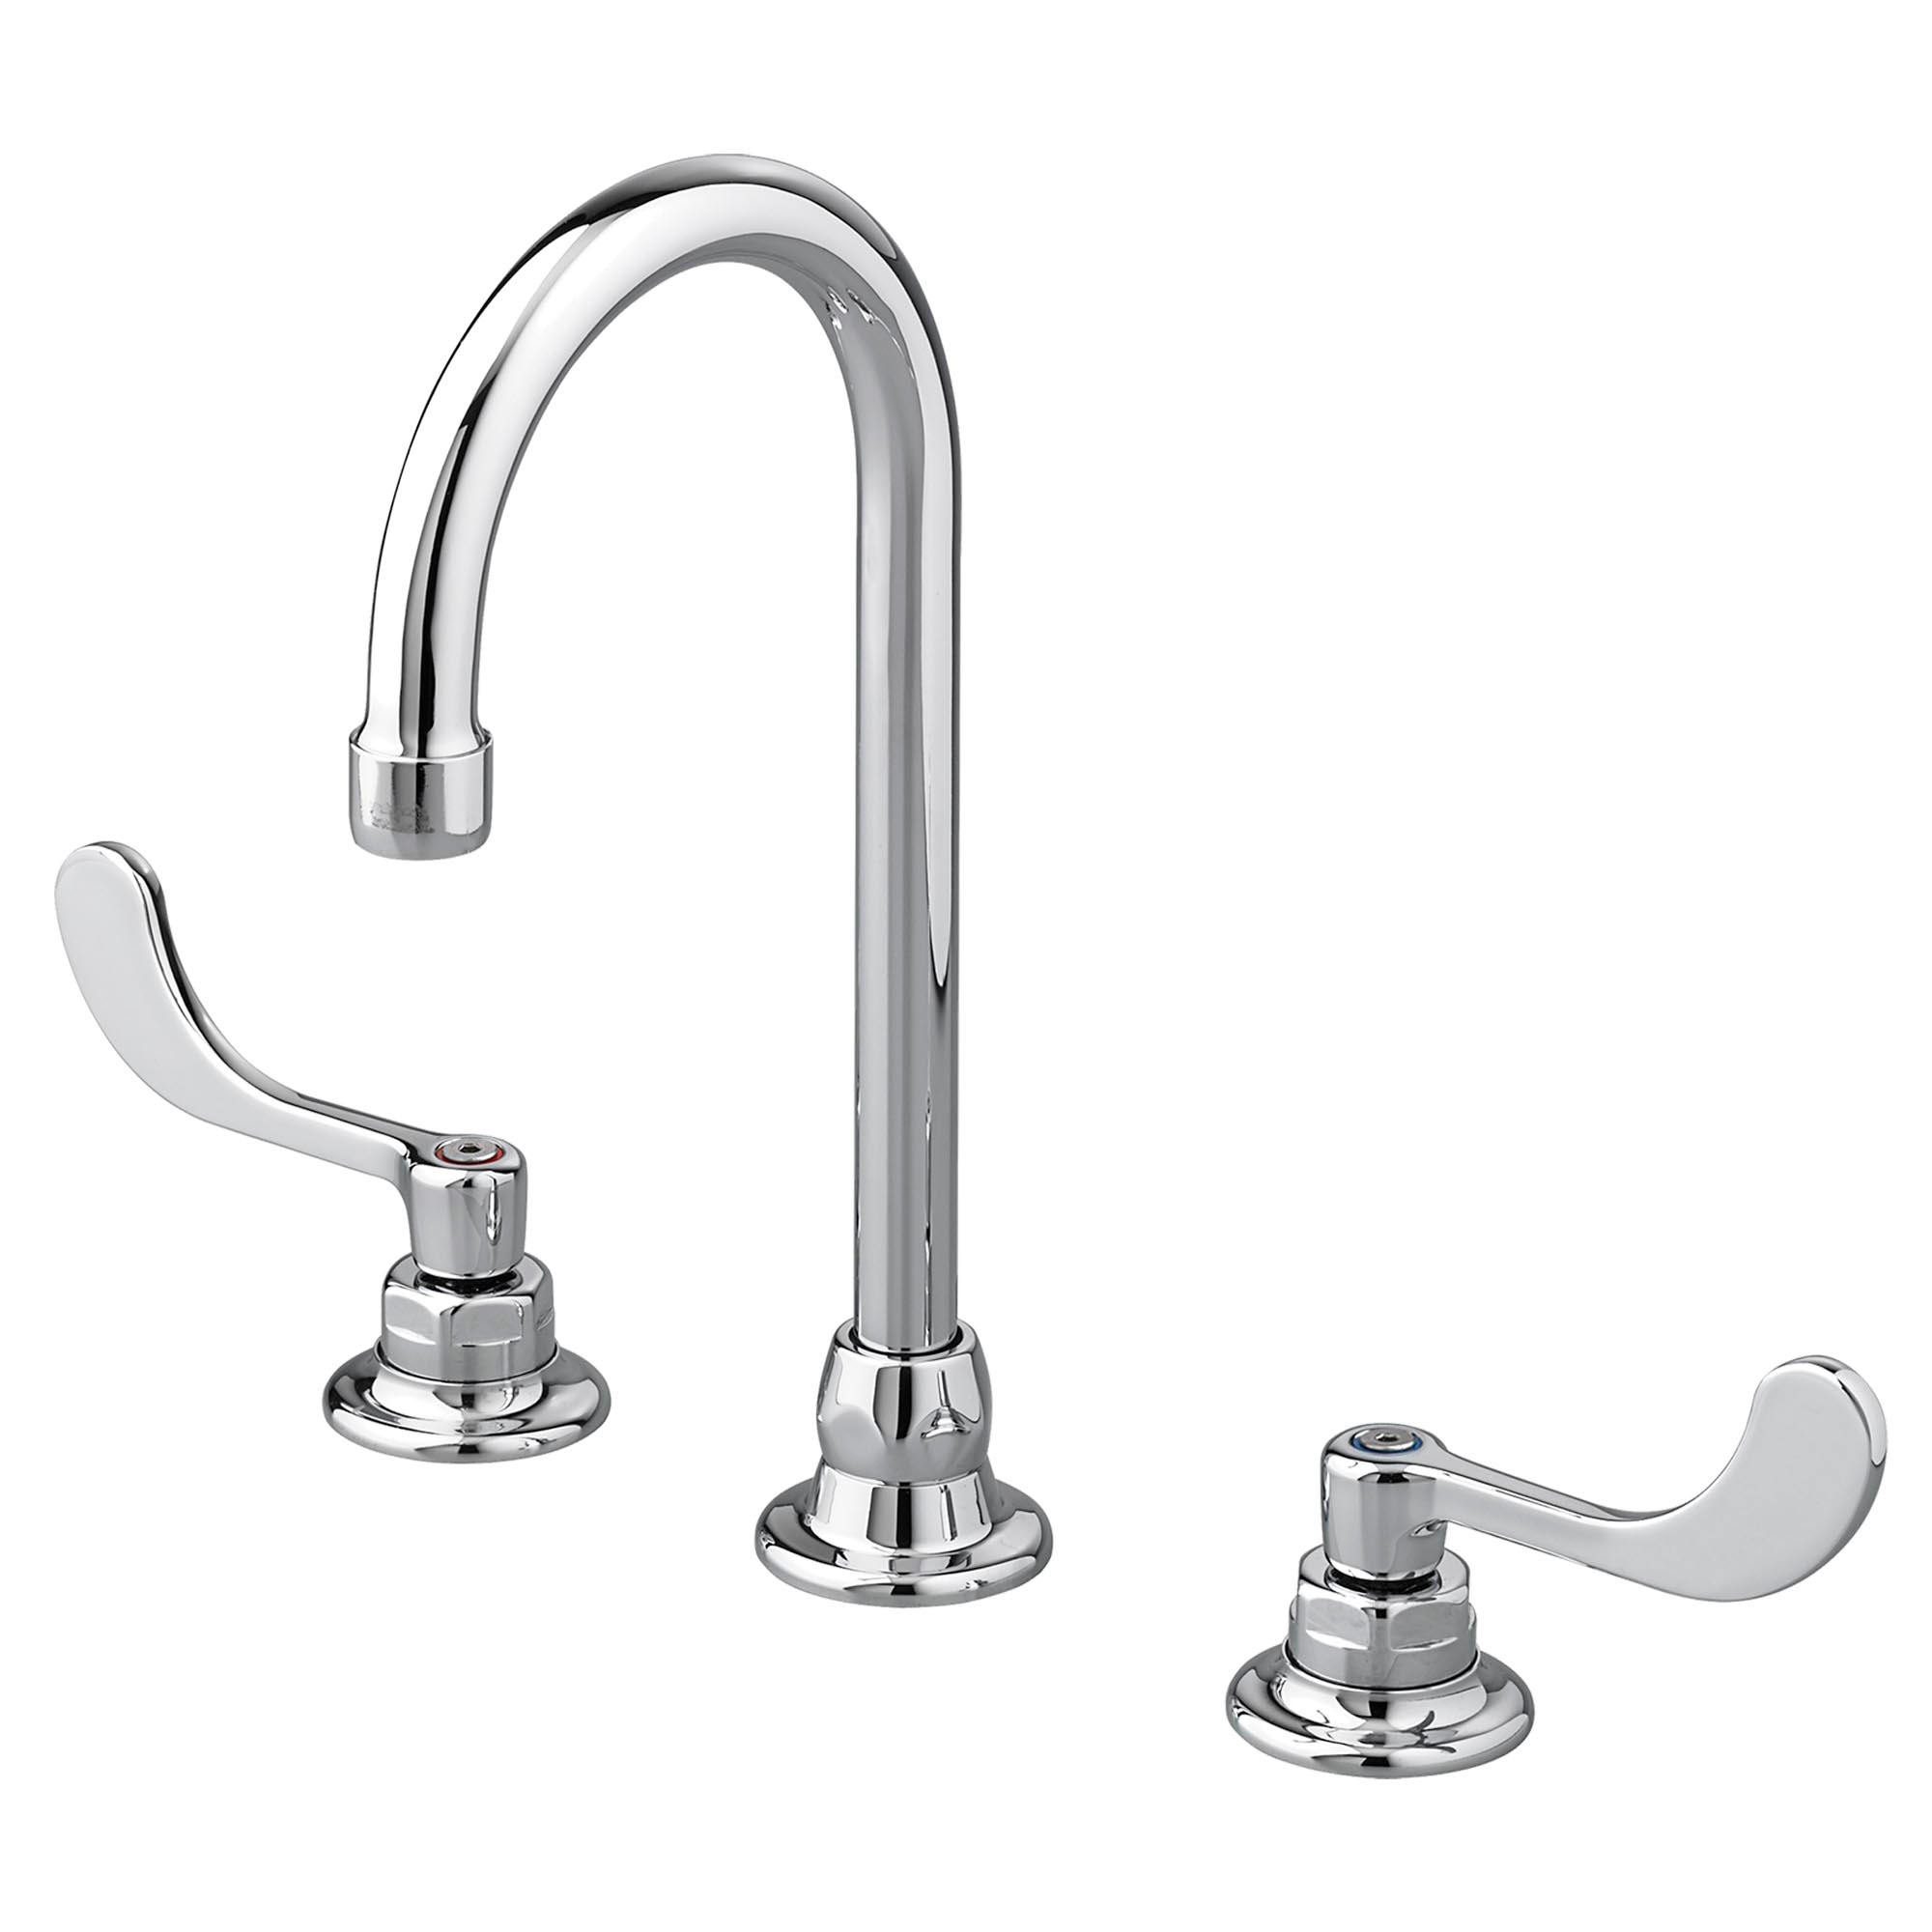 Monterrey™ 8-Inch Widespread Gooseneck Faucet With Wrist Blade Handles 1.5 gpm/5.7 Lpm With Limited Swivel